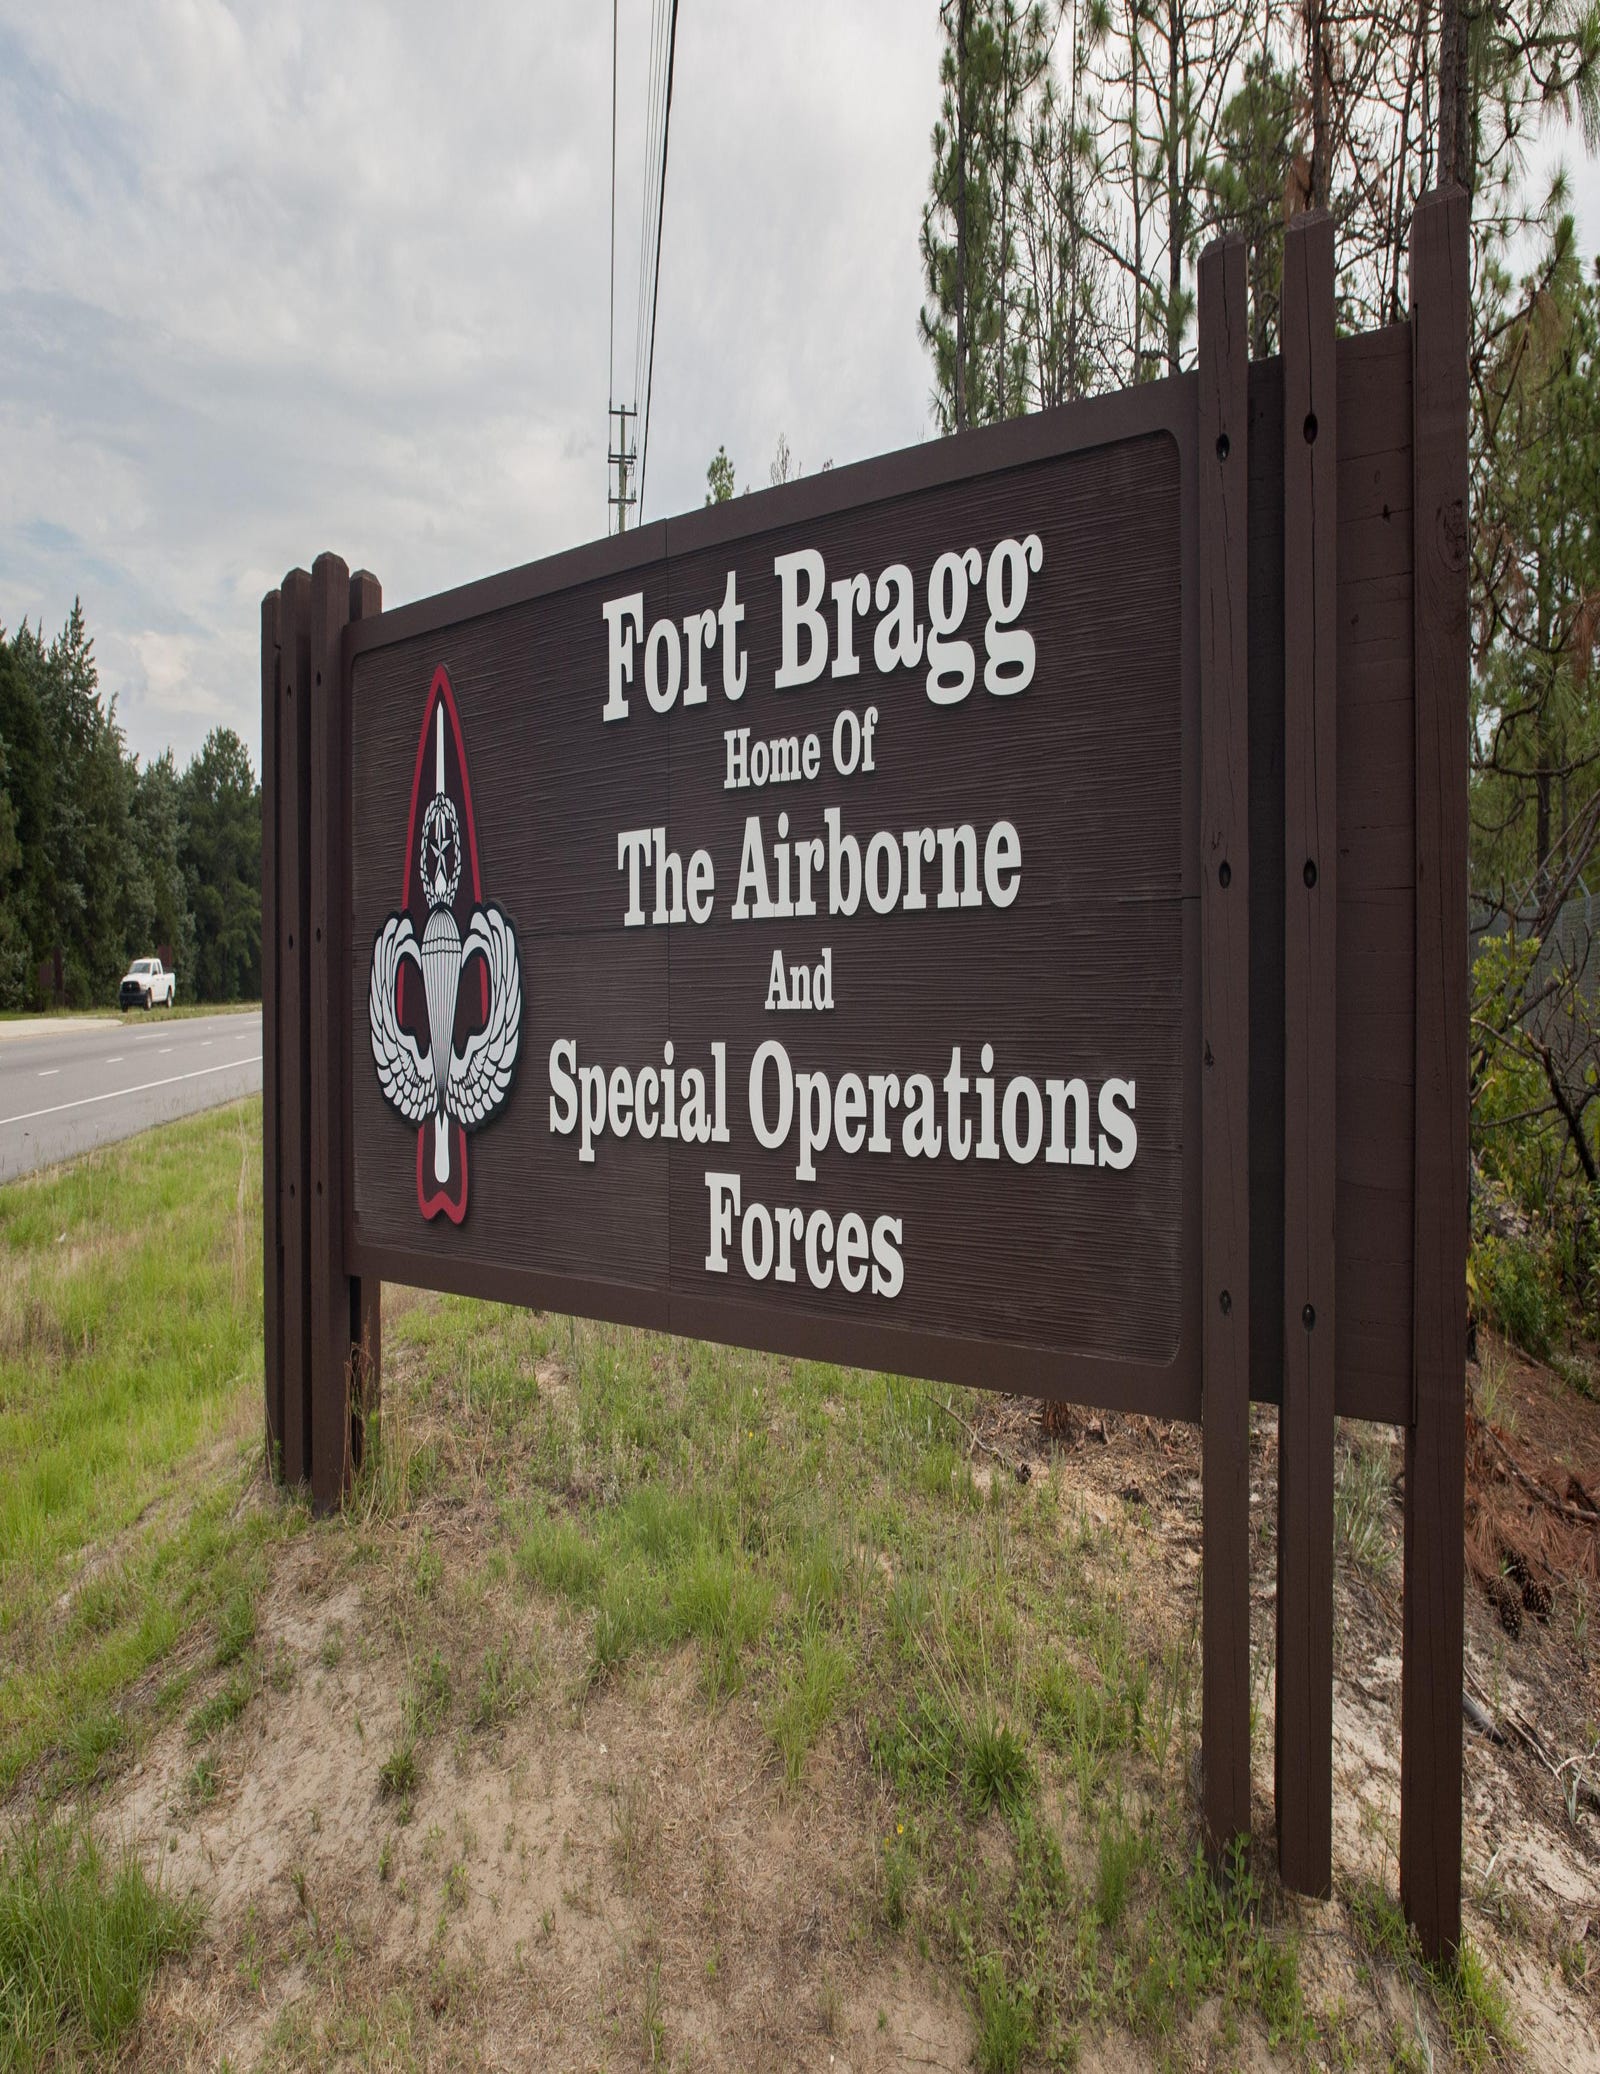 Fort Bragg Clinic Restructuring Plan Subject To More Review